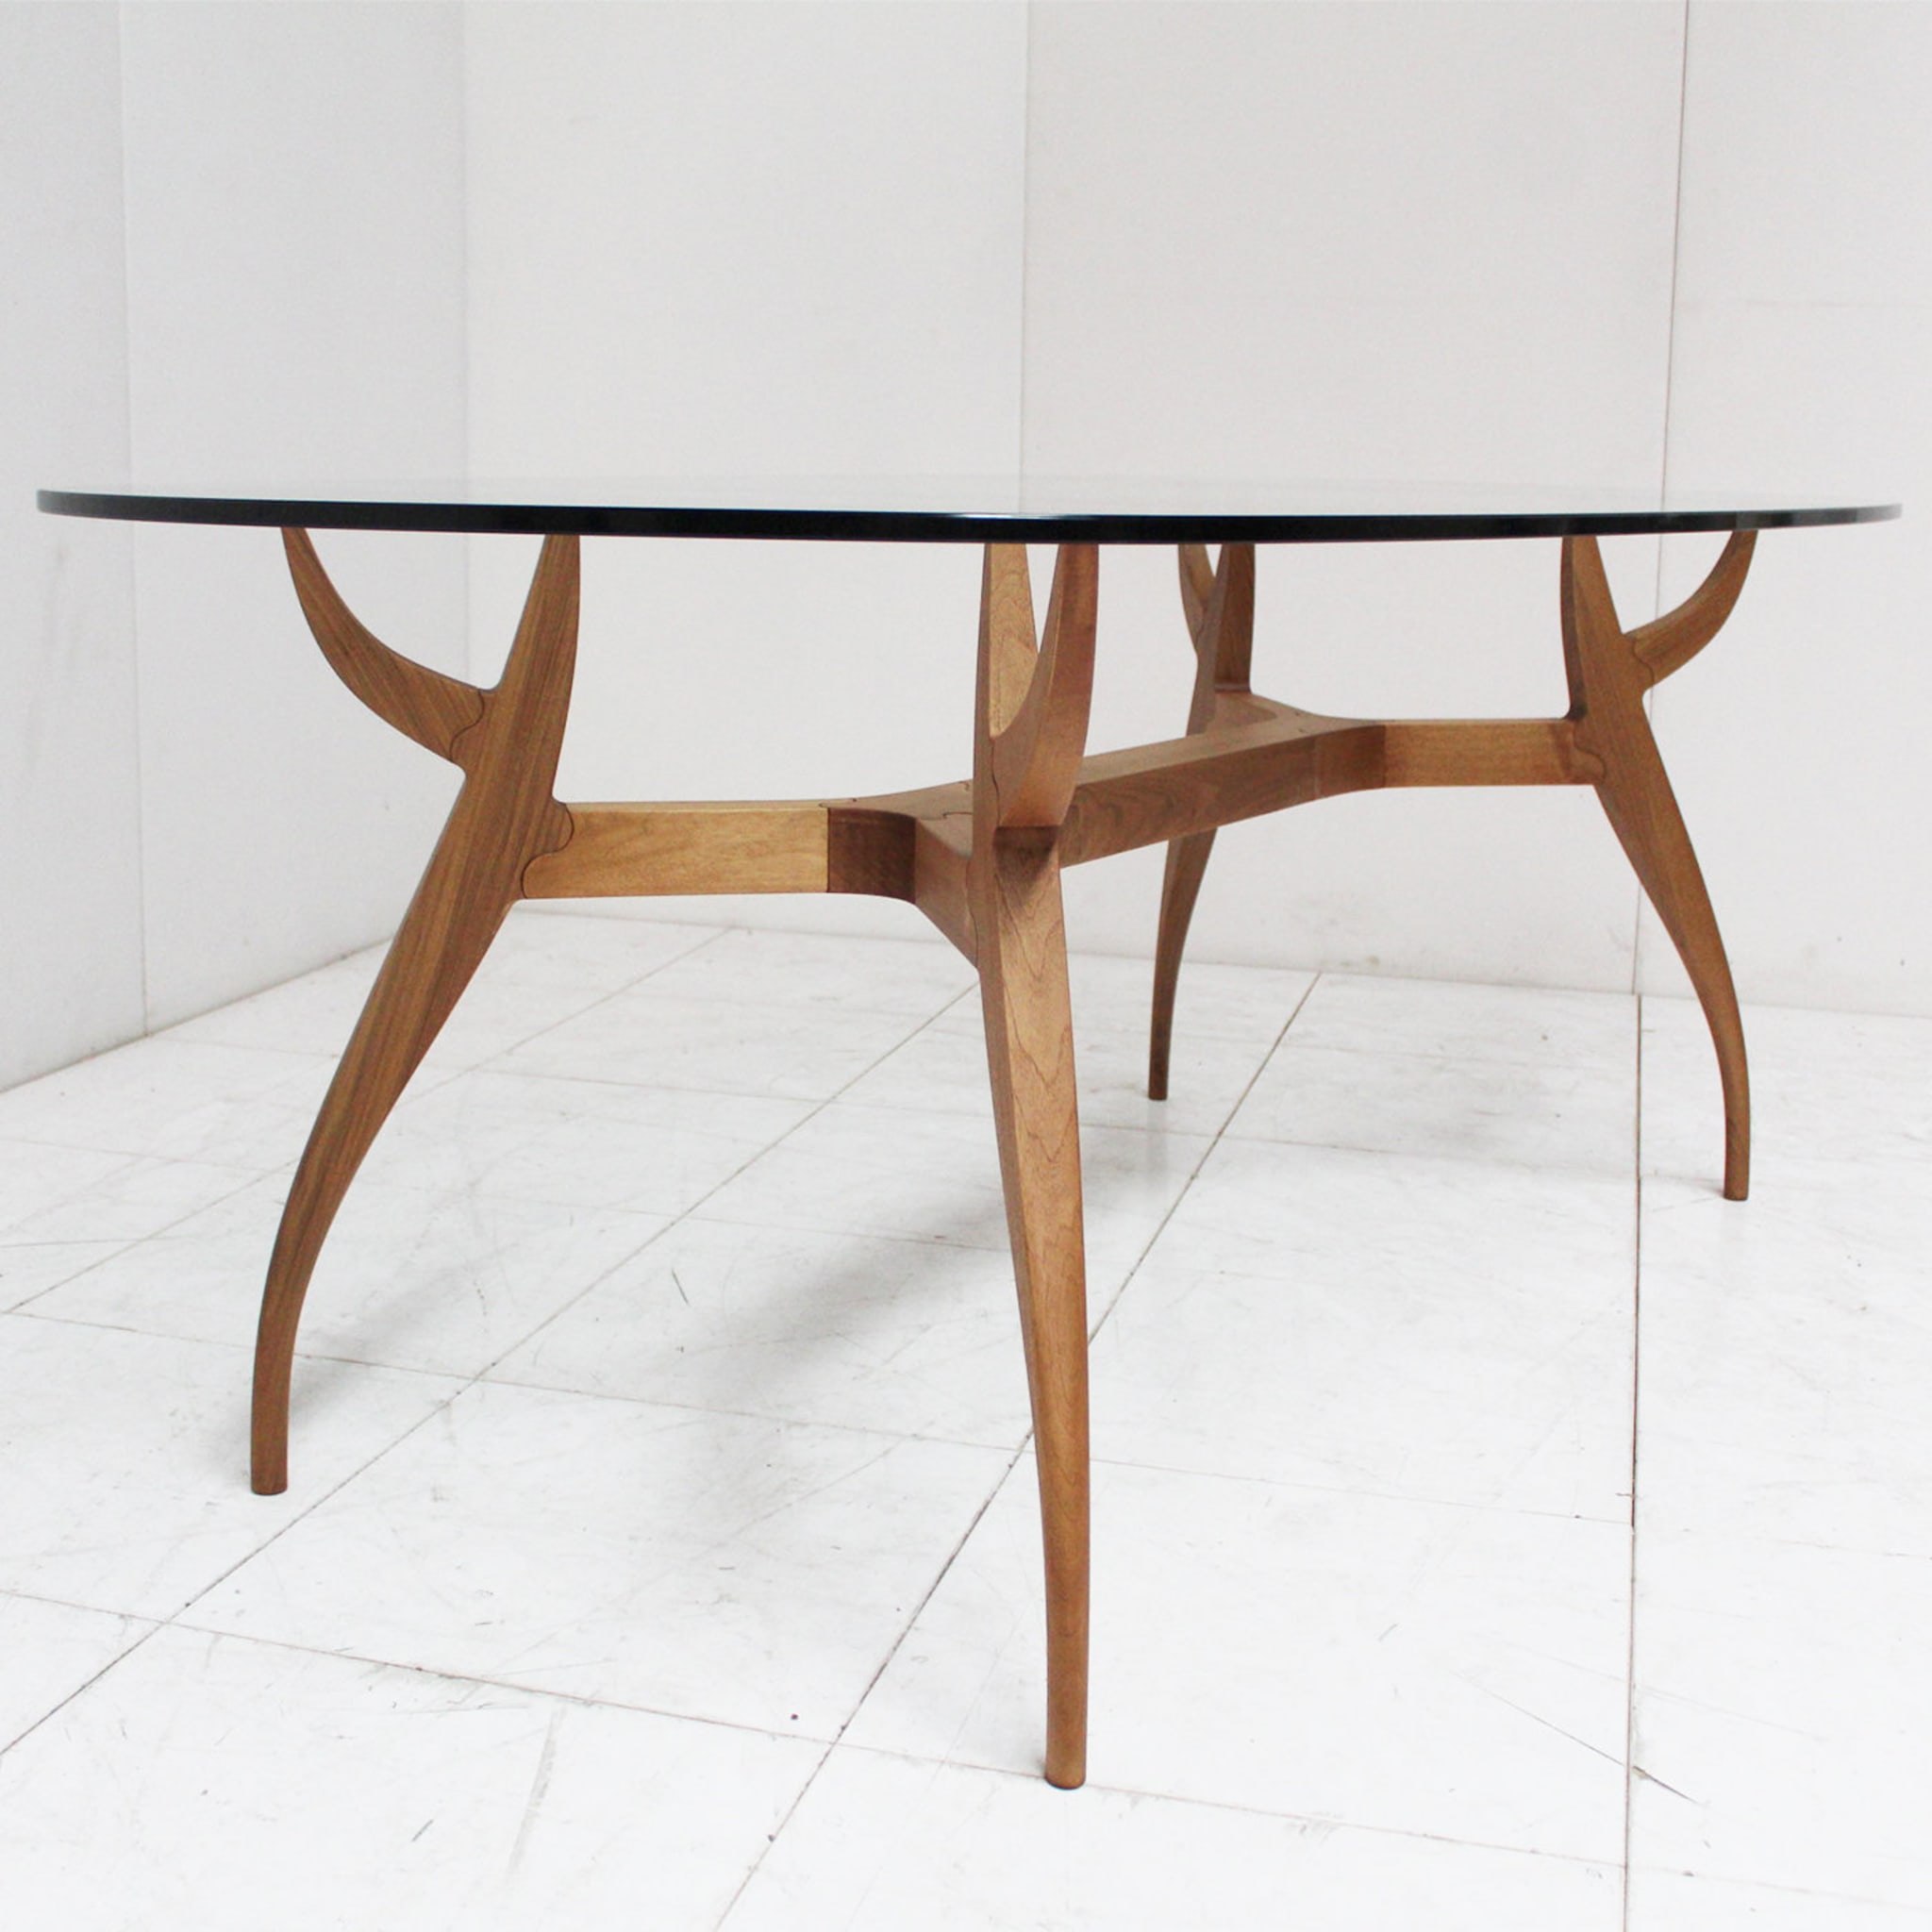 Stag Dining Table By Nigel Coates - Alternative view 2